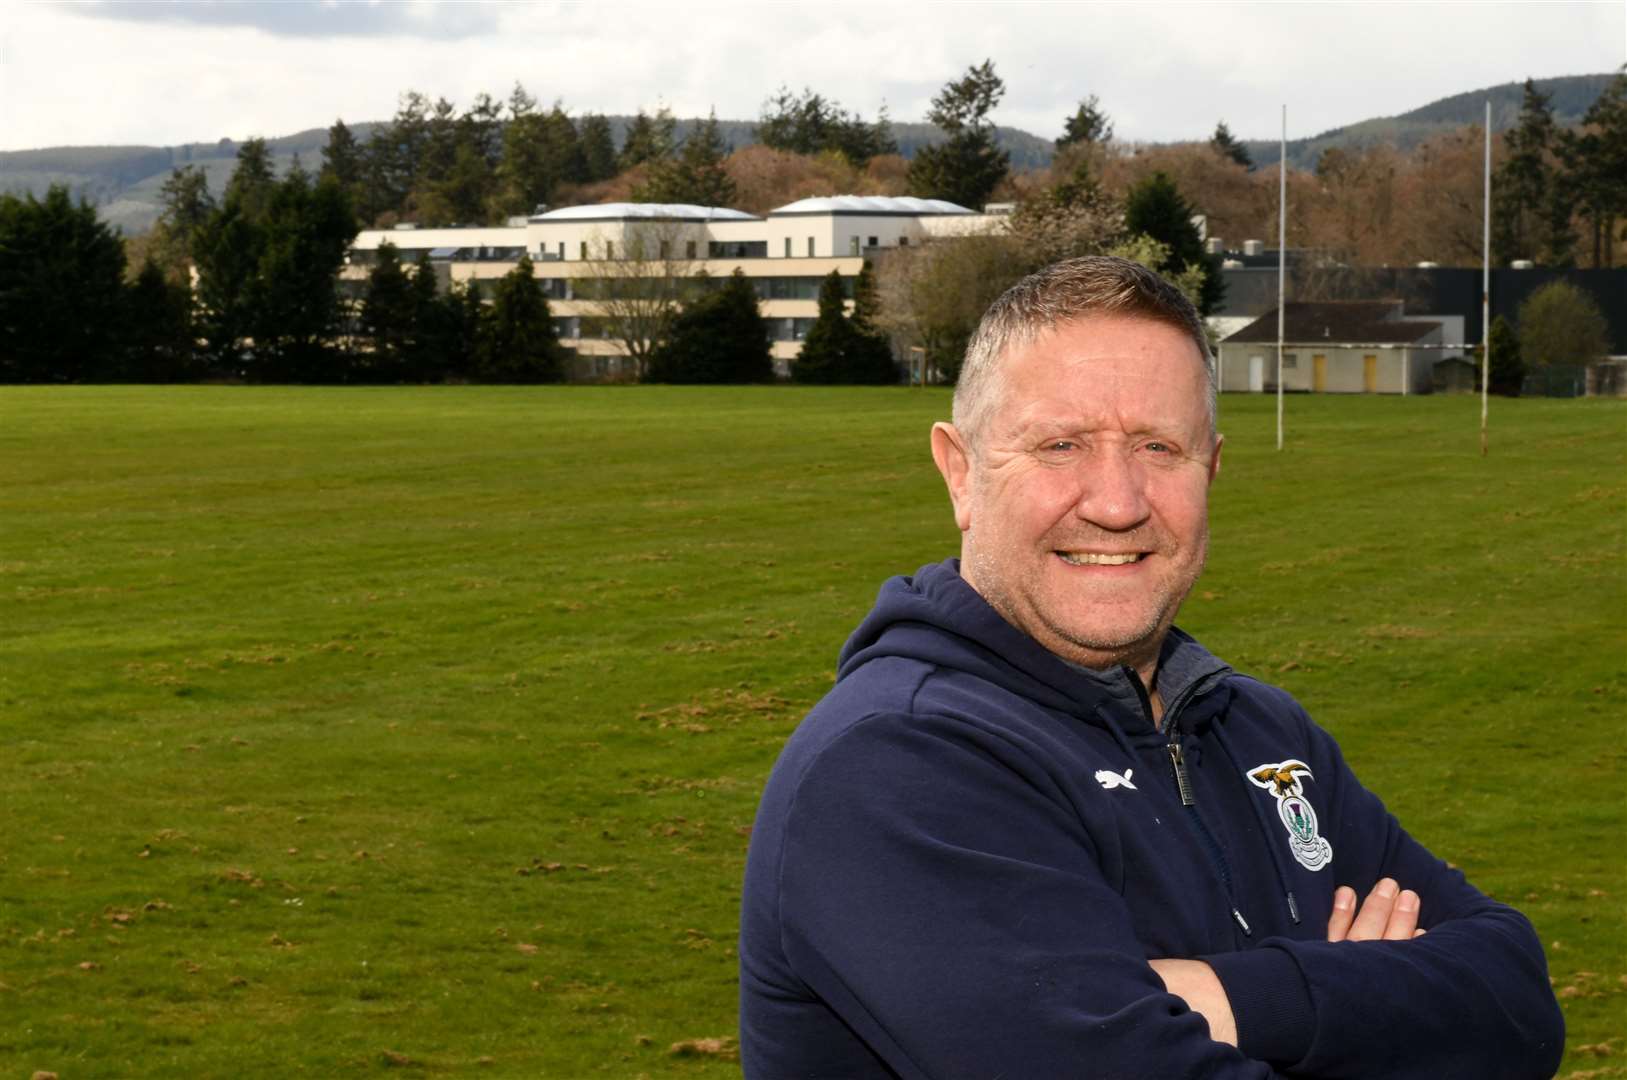 John Robertson, Inverness Caledonian Thistle sporting director, standing in the vacant playing field adjacent to Inverness Royal Academy.